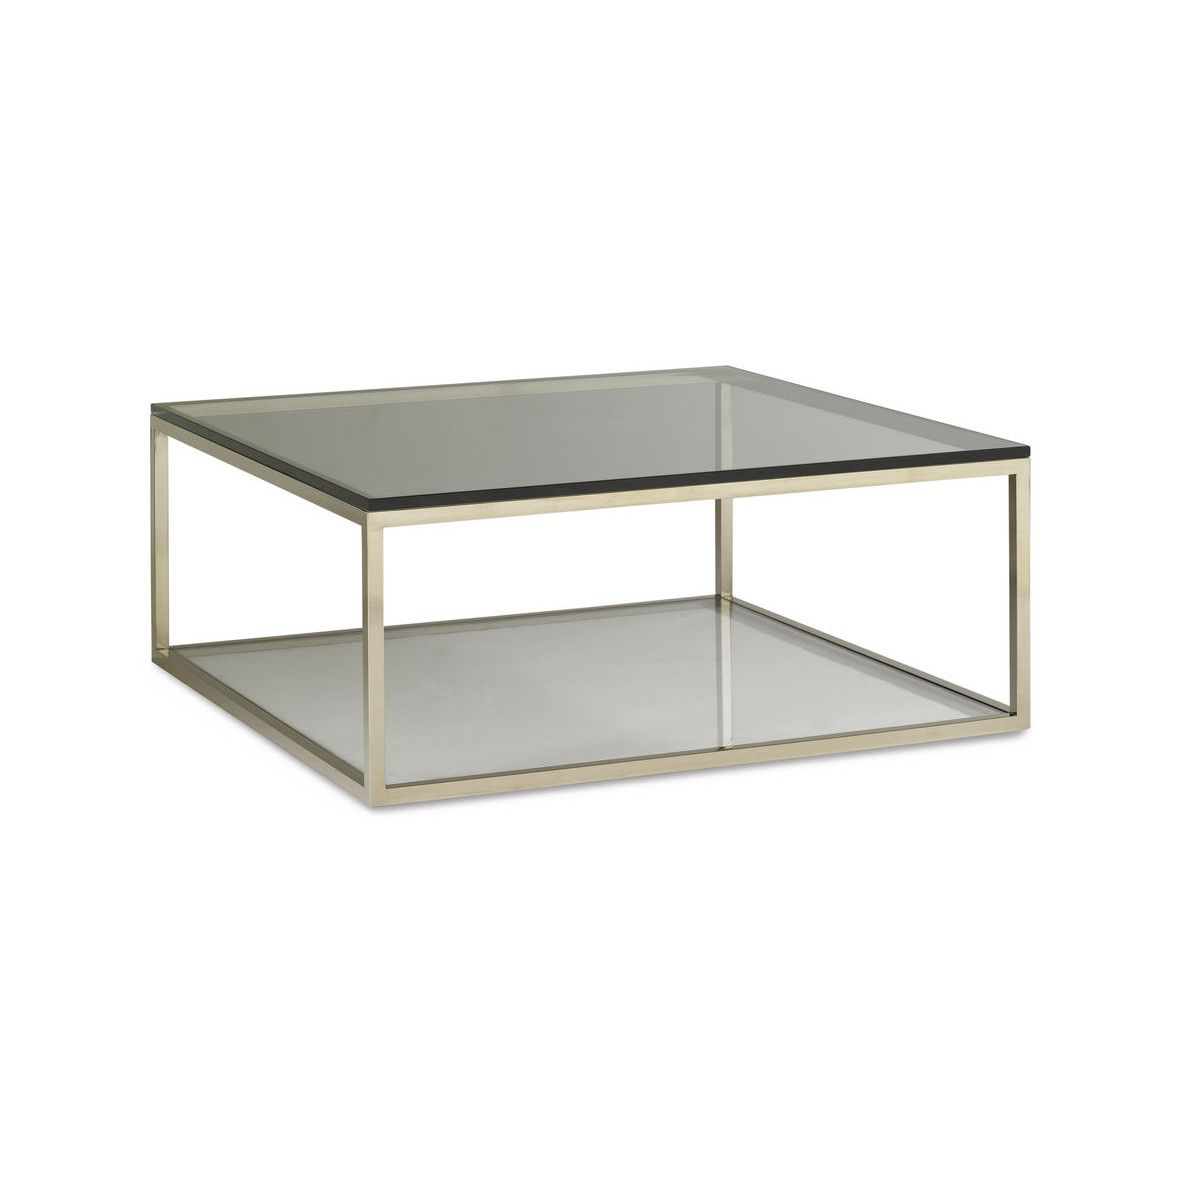 Square Glass Coffee Tables 1970 Designer Smoked Glass Chrome Square Coffee Table Simple Table (View 1 of 10)